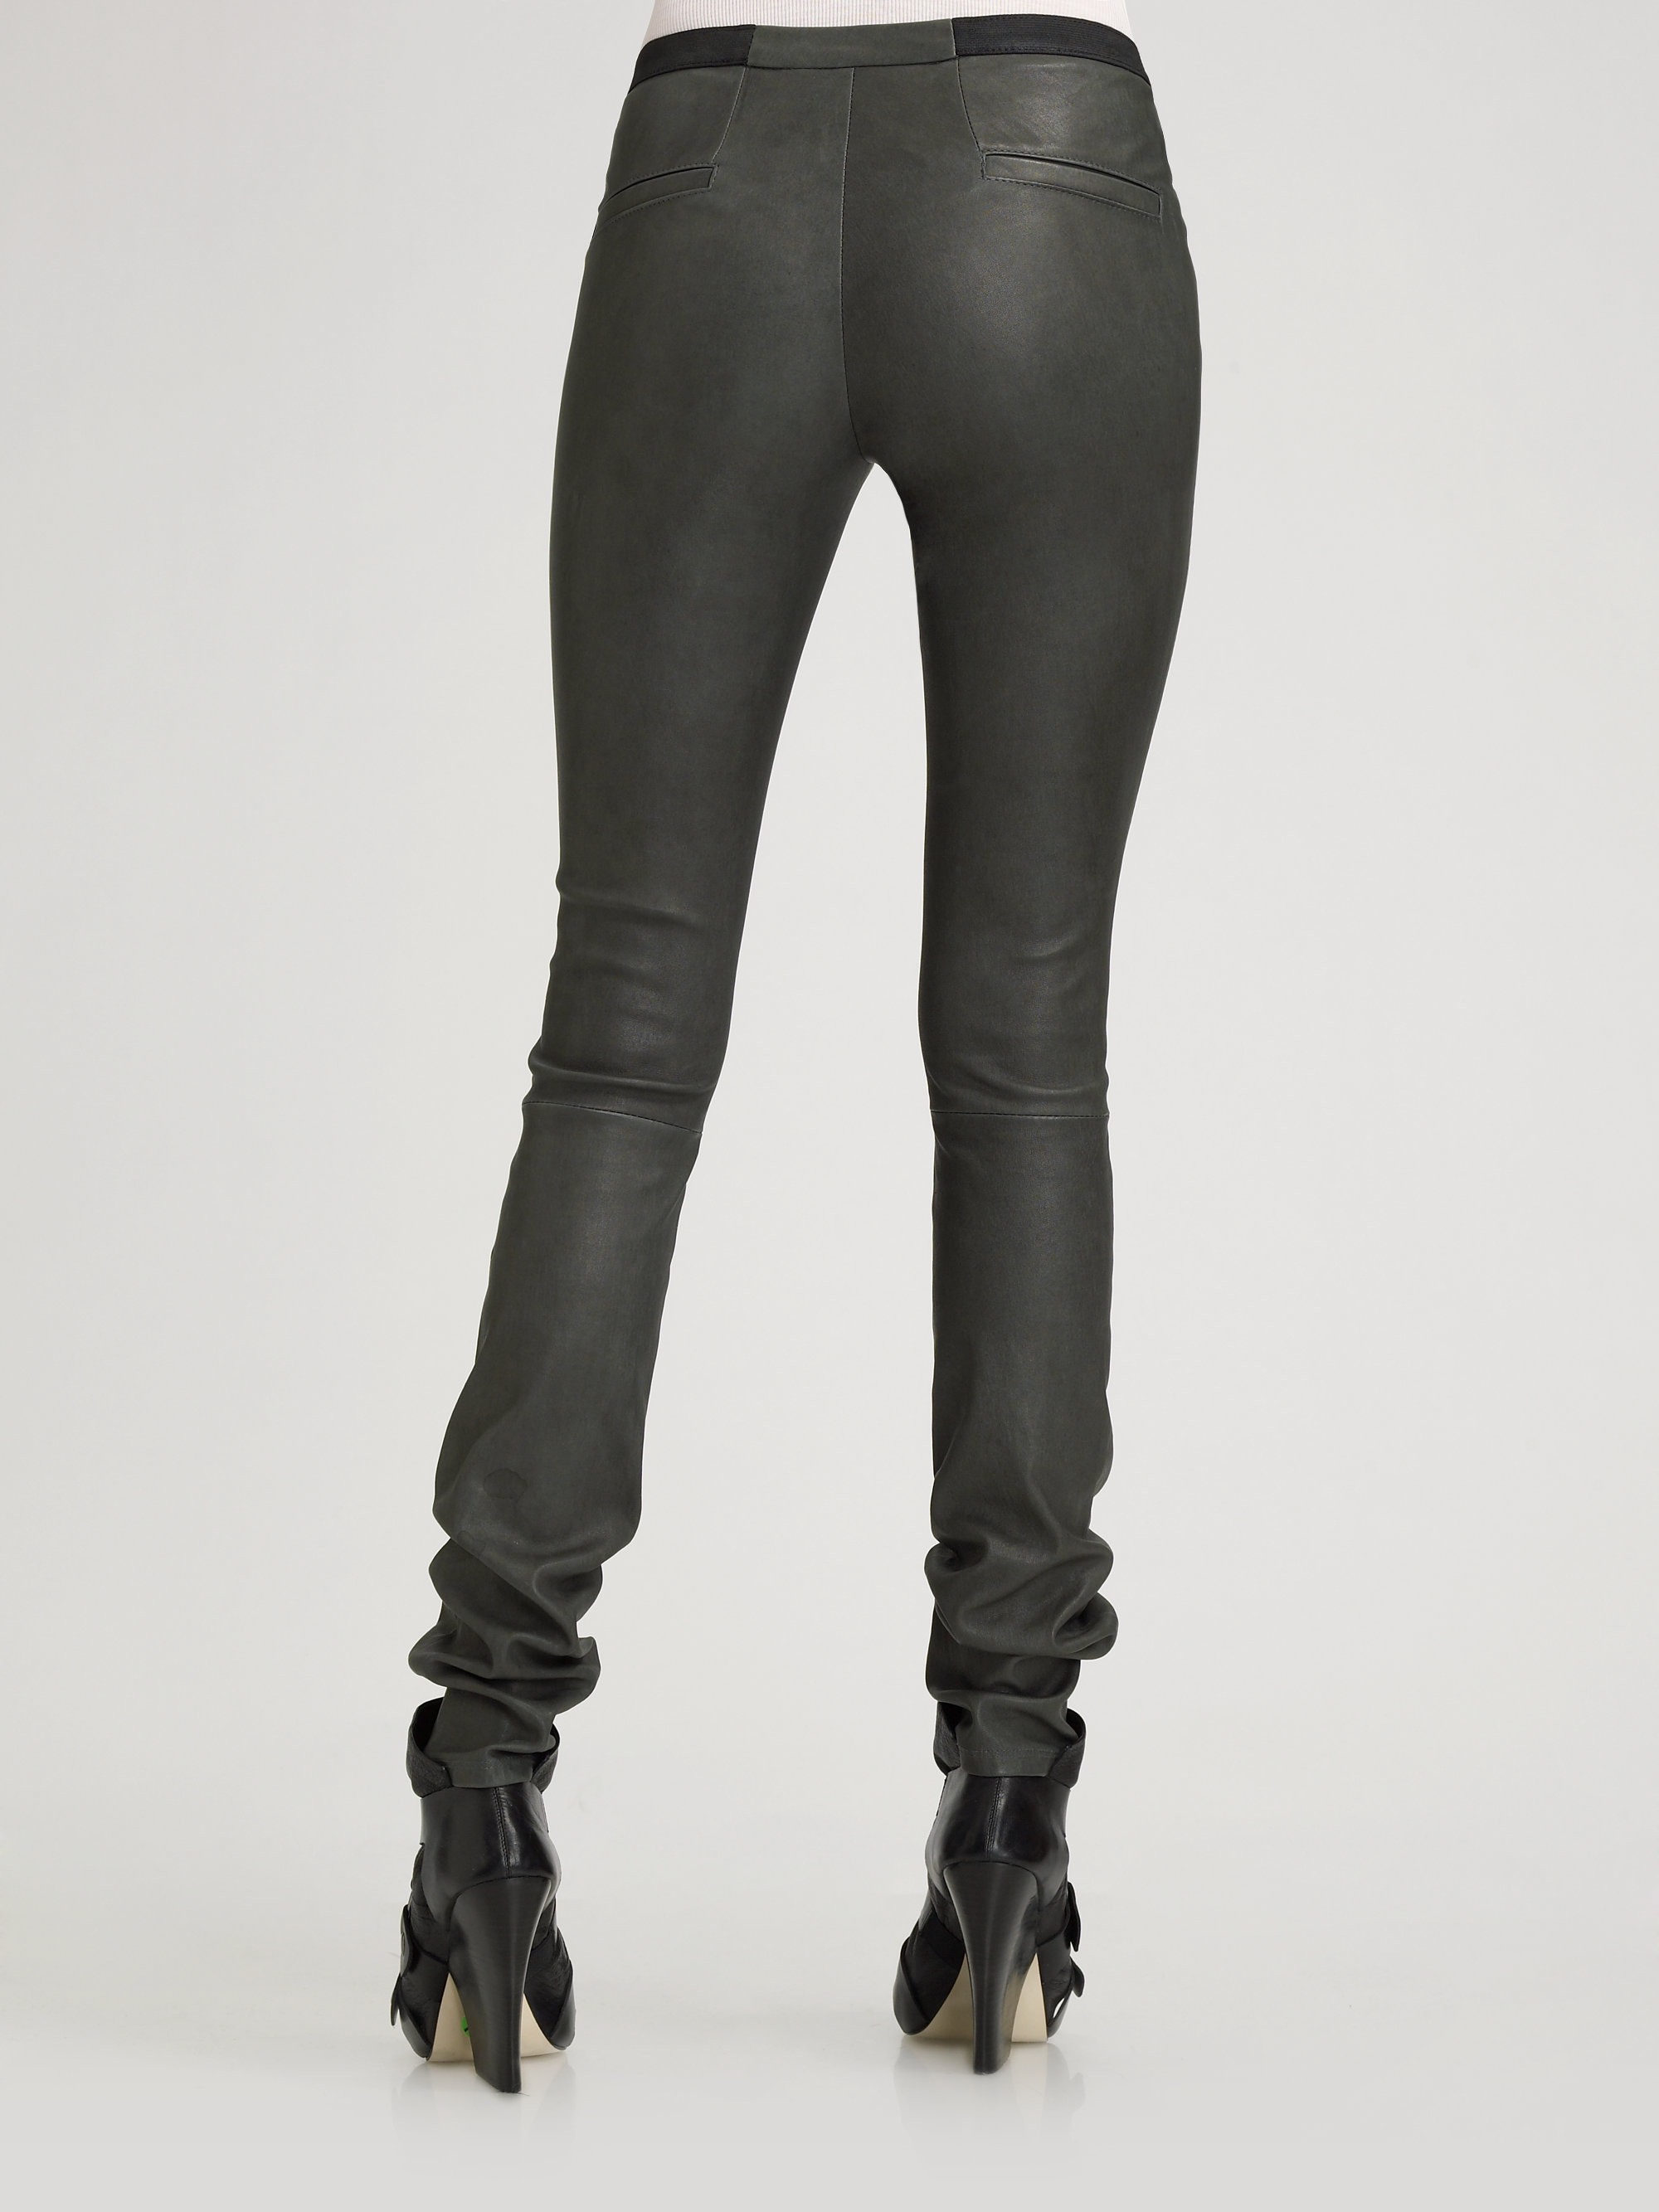 Helmut Lang Stretch Leather Leggings in Grey (Gray) - Lyst